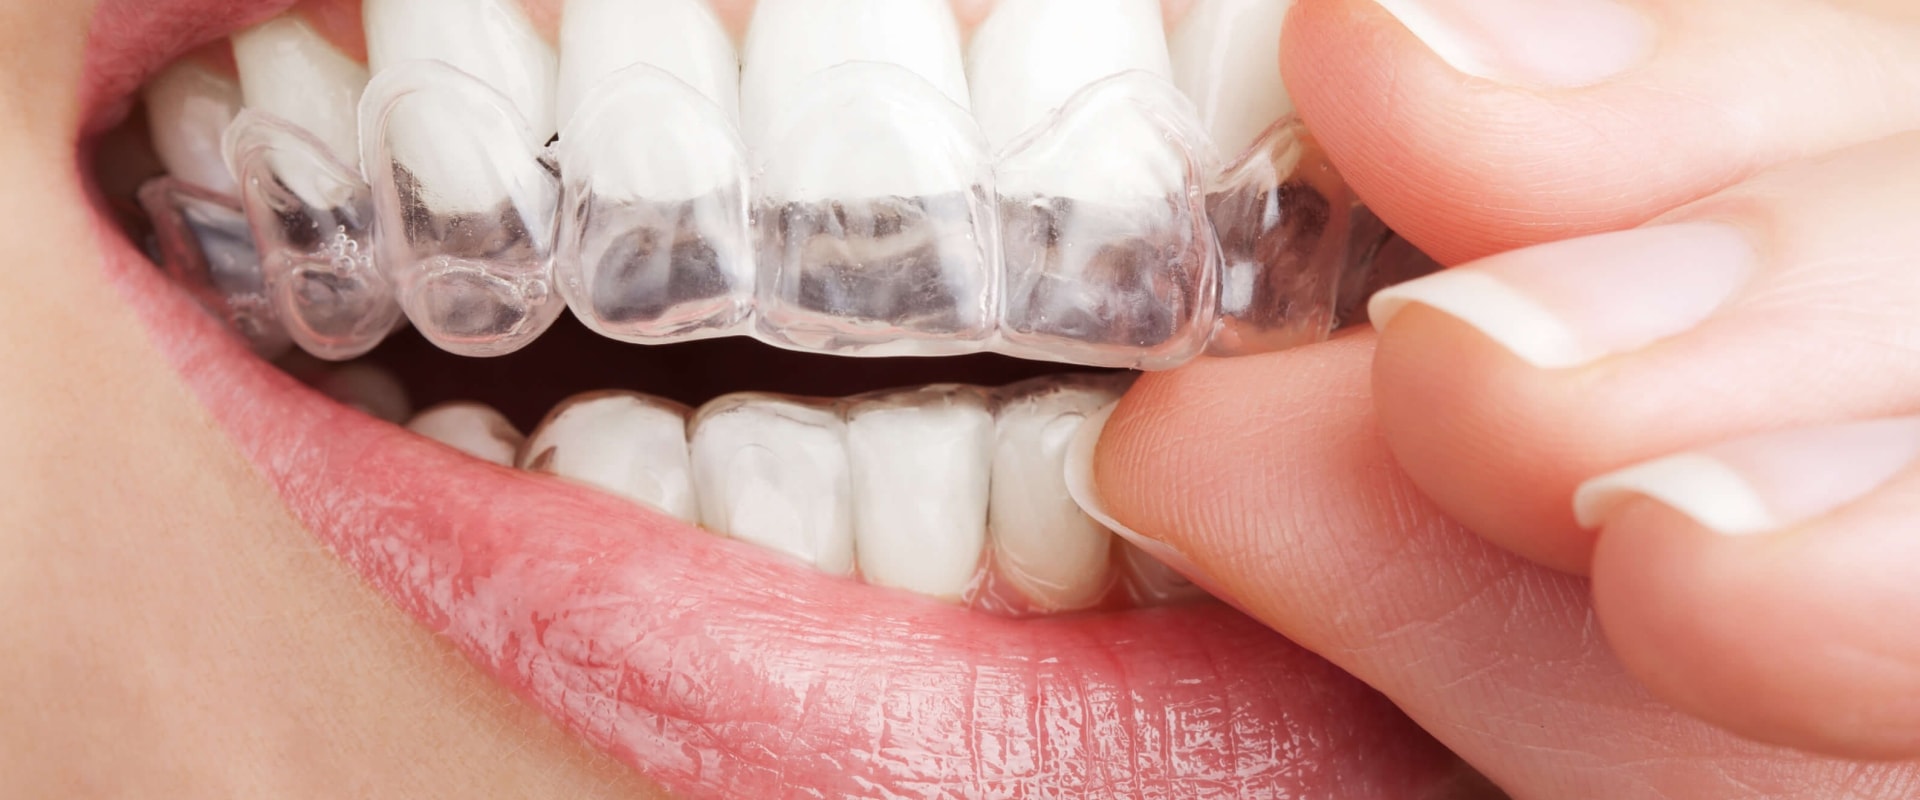 Why is invisalign bad?